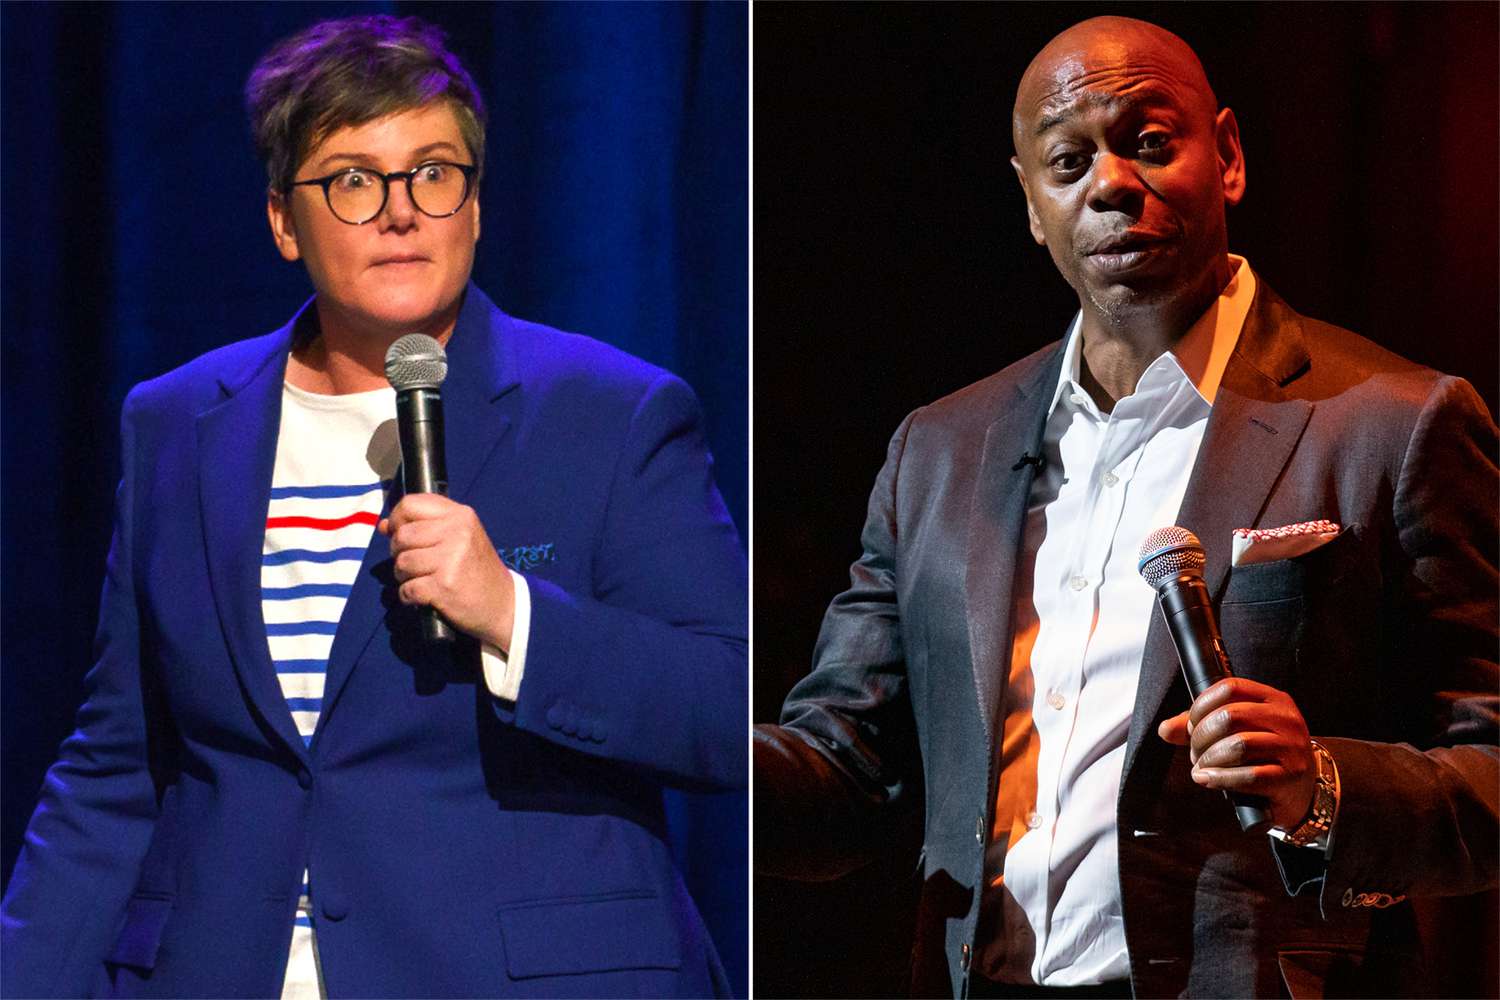 Hannah Gadsby isn't interested in talking with Dave Chappelle